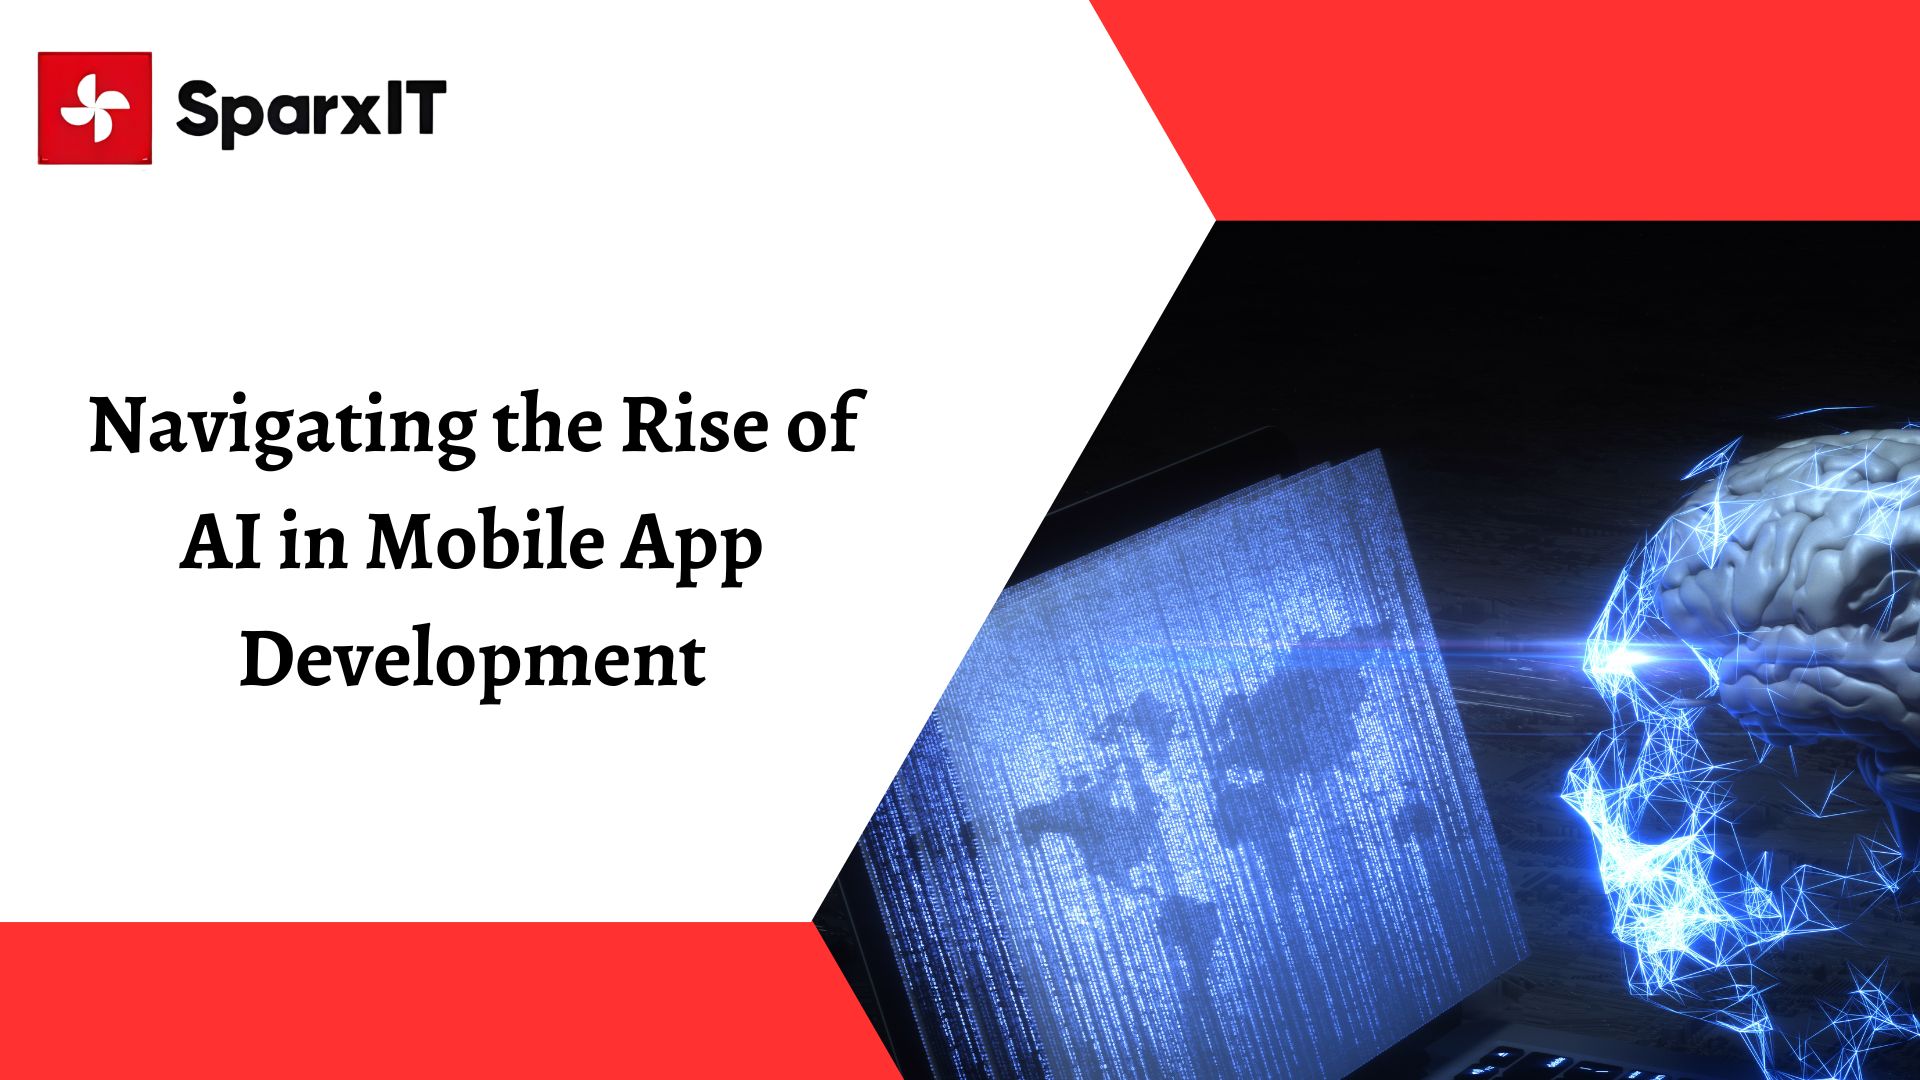 Navigating the Rise of AI in Mobile App Development